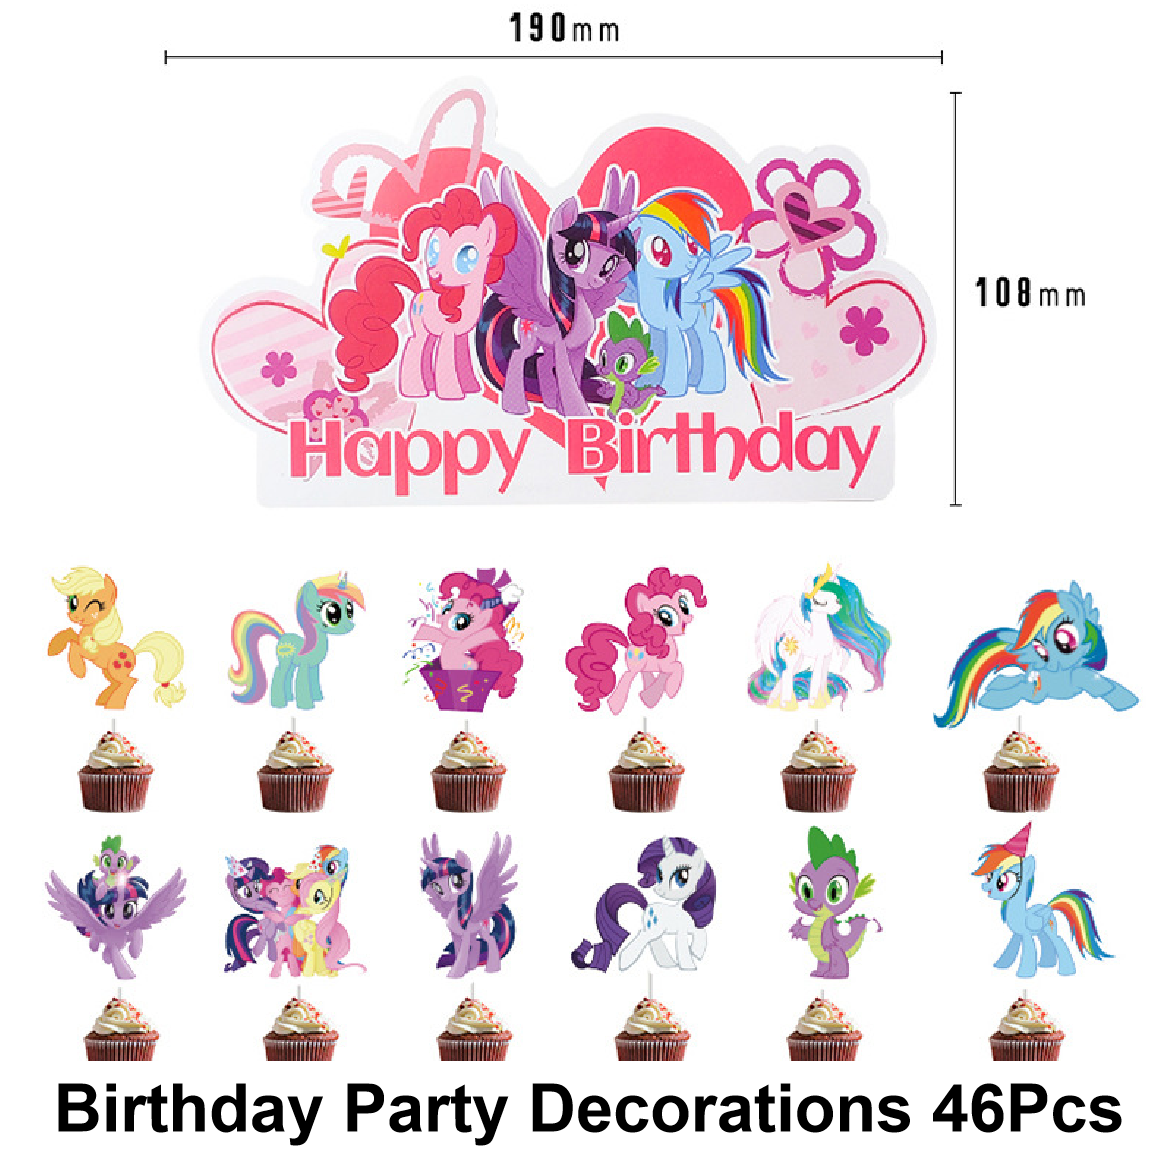 Party Decorations - My Little Pony Ultimate Party (Banner, Balloons, Cupcake Toppers) - Set 46pcs